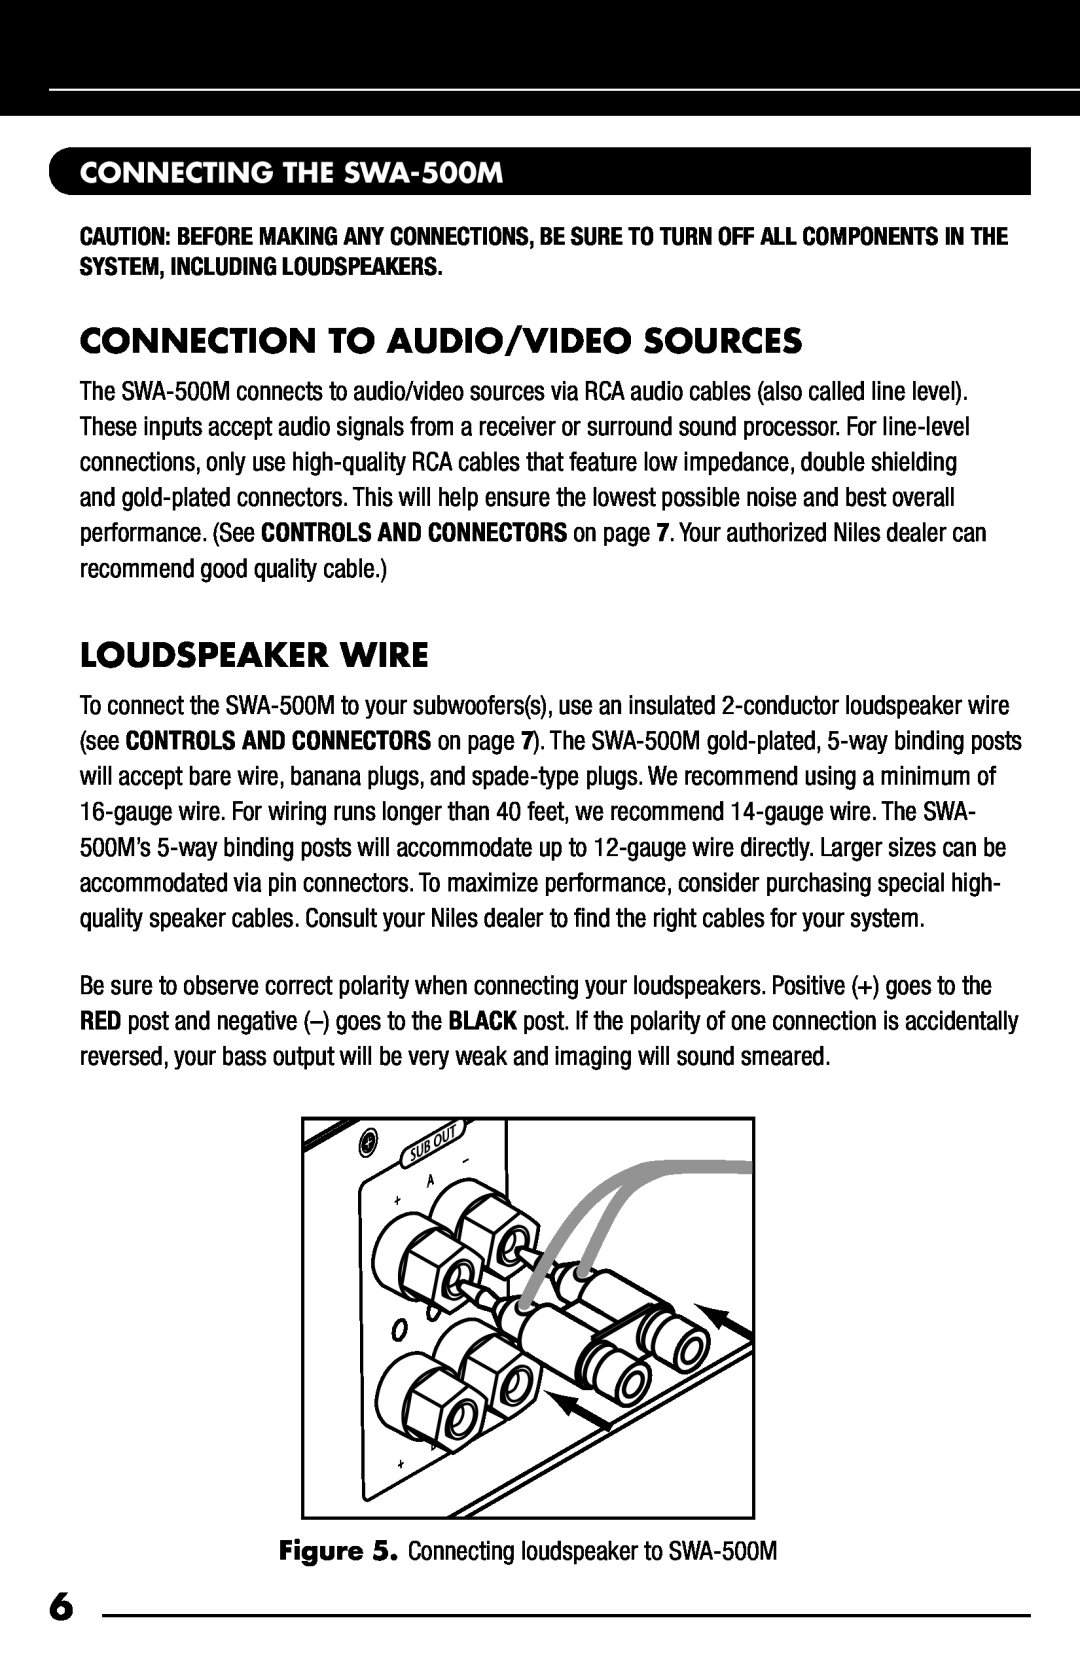 Niles Audio manual Connection To Audio/Video Sources, Loudspeaker Wire, CONNECTING THE SWA-500M 